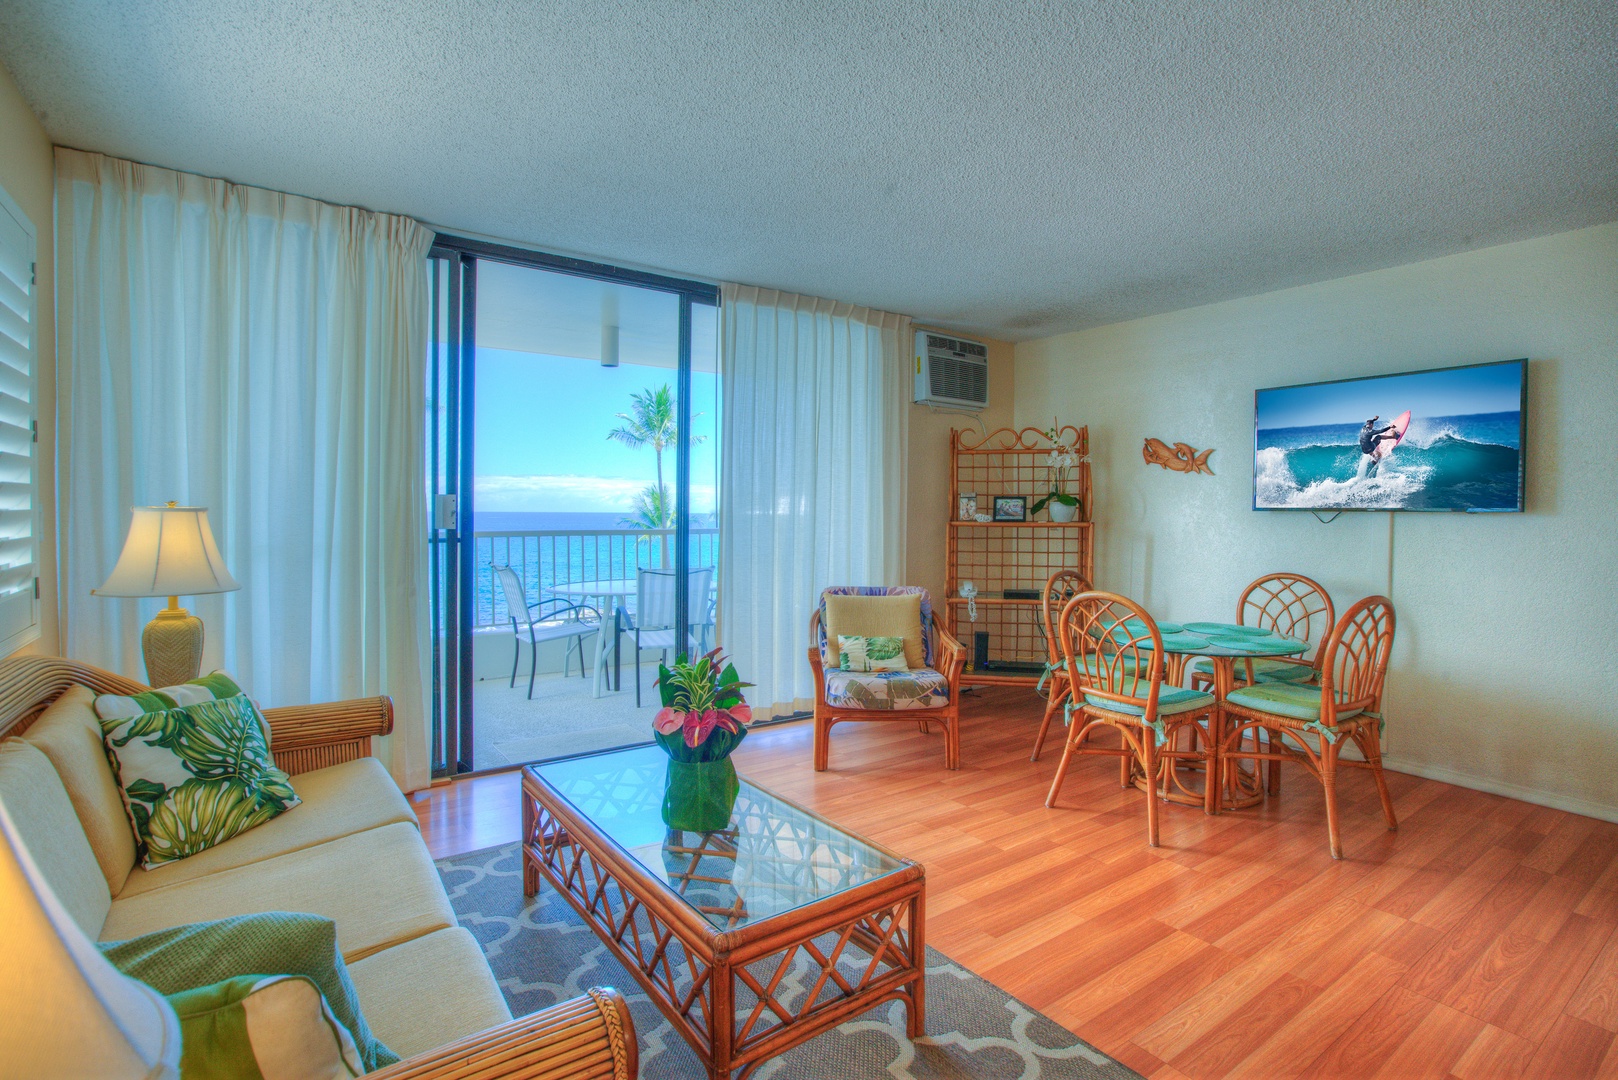 Kailua Kona Vacation Rentals, Kona Reef F11 - Air conditioned living room with flat screen TV